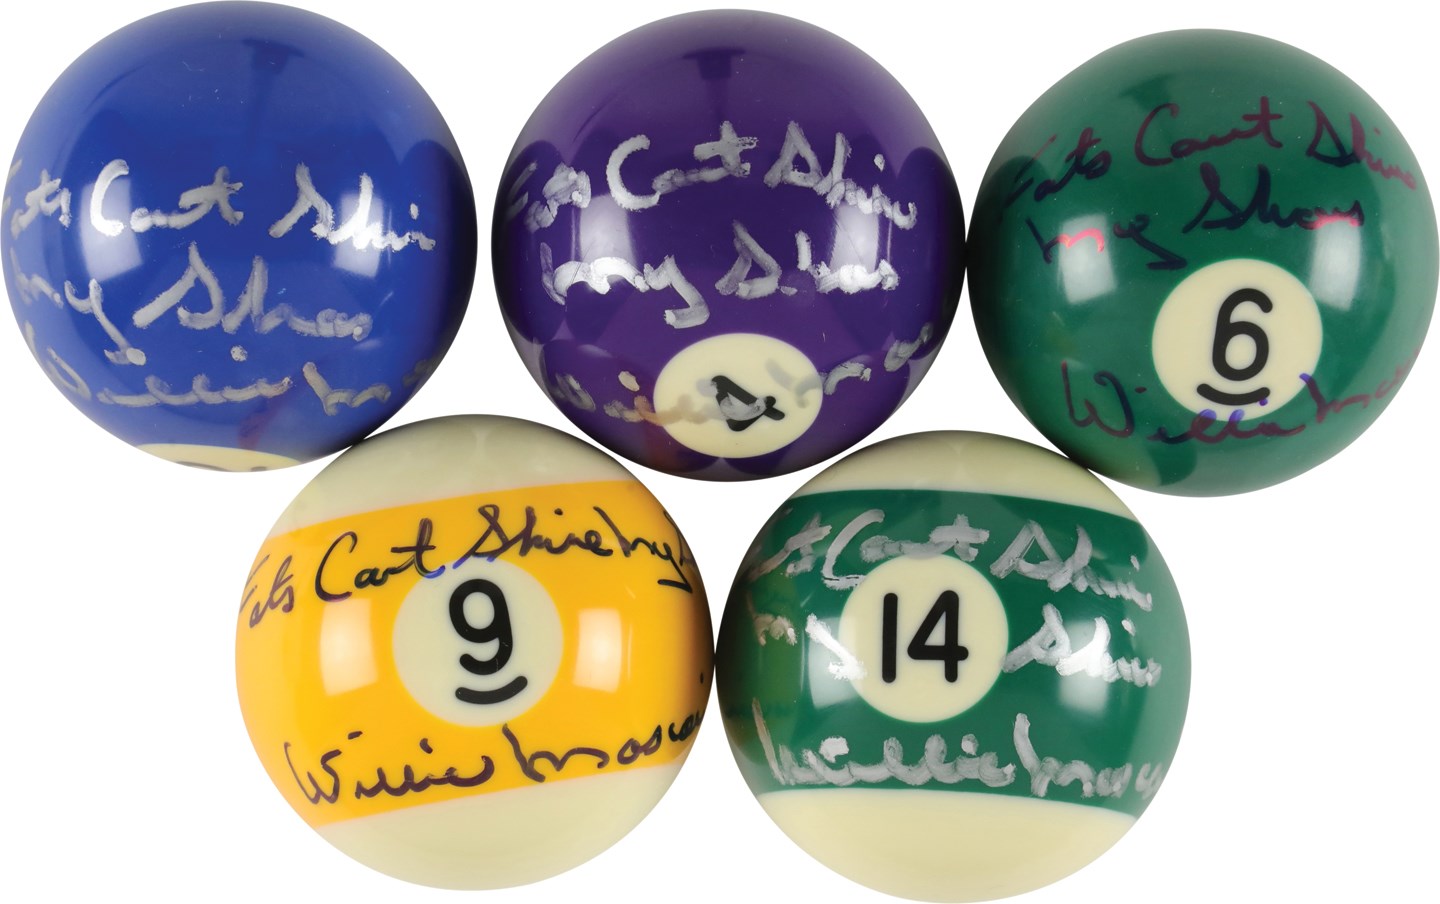 Olympics and All Sports - Circa Late 1970s Willie Mosconi Signed Pool Balls Inscribed "Fats Can't Sign My Shoes" Collection (5) All PSA